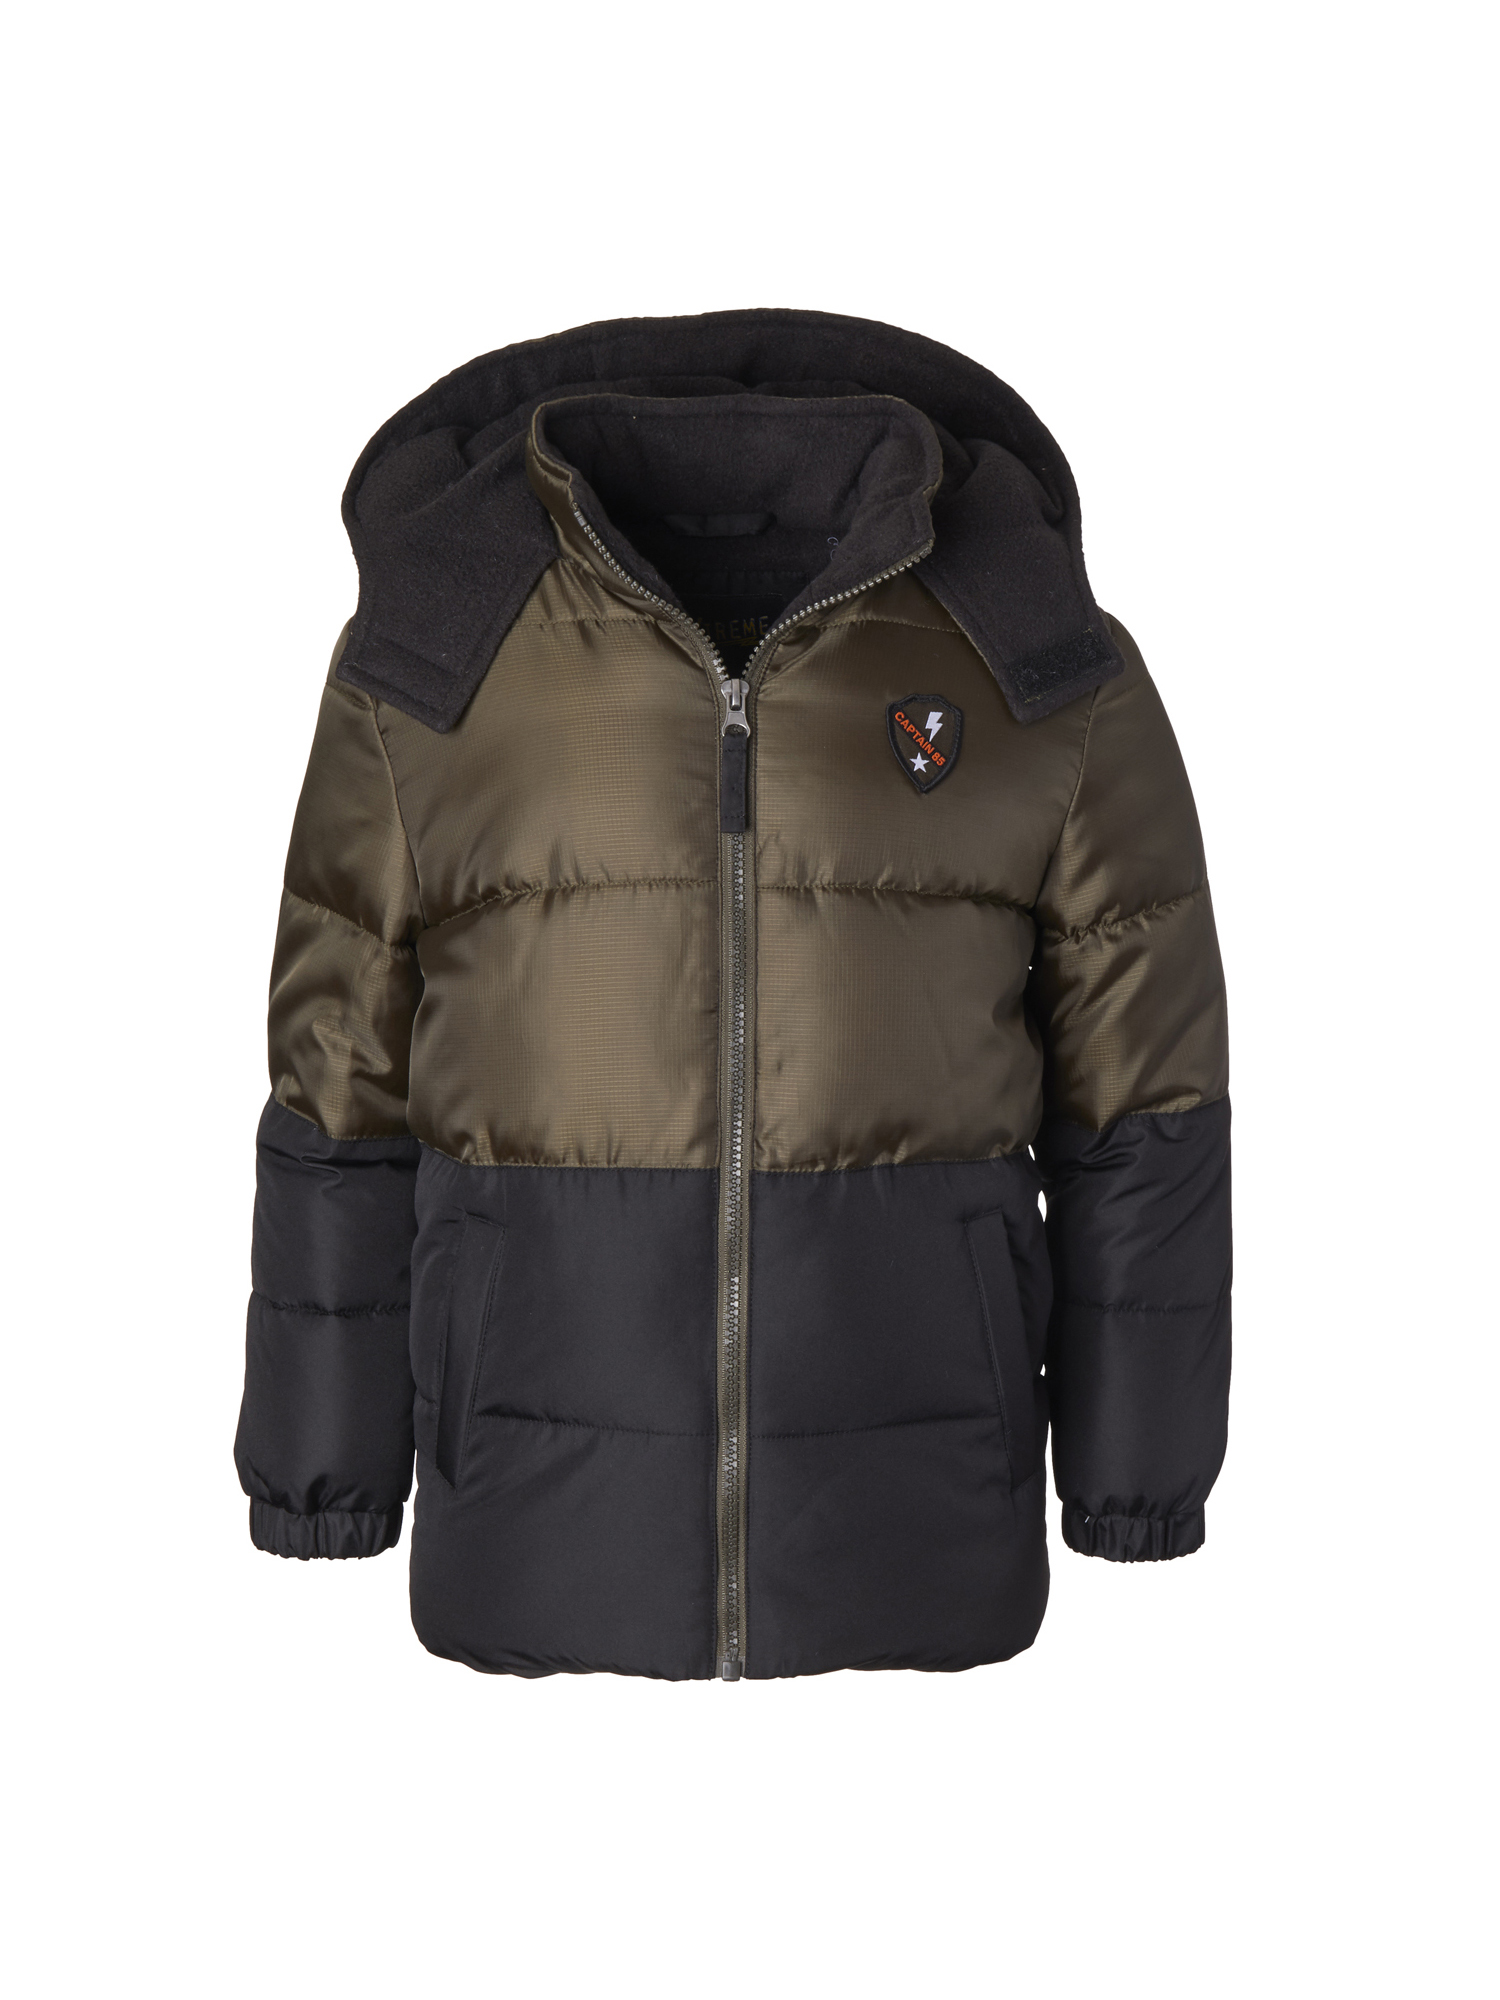 iXtreme Colorblock Puffer Jacket with Front Patch (Little Boys & Big Boys) - image 1 of 3